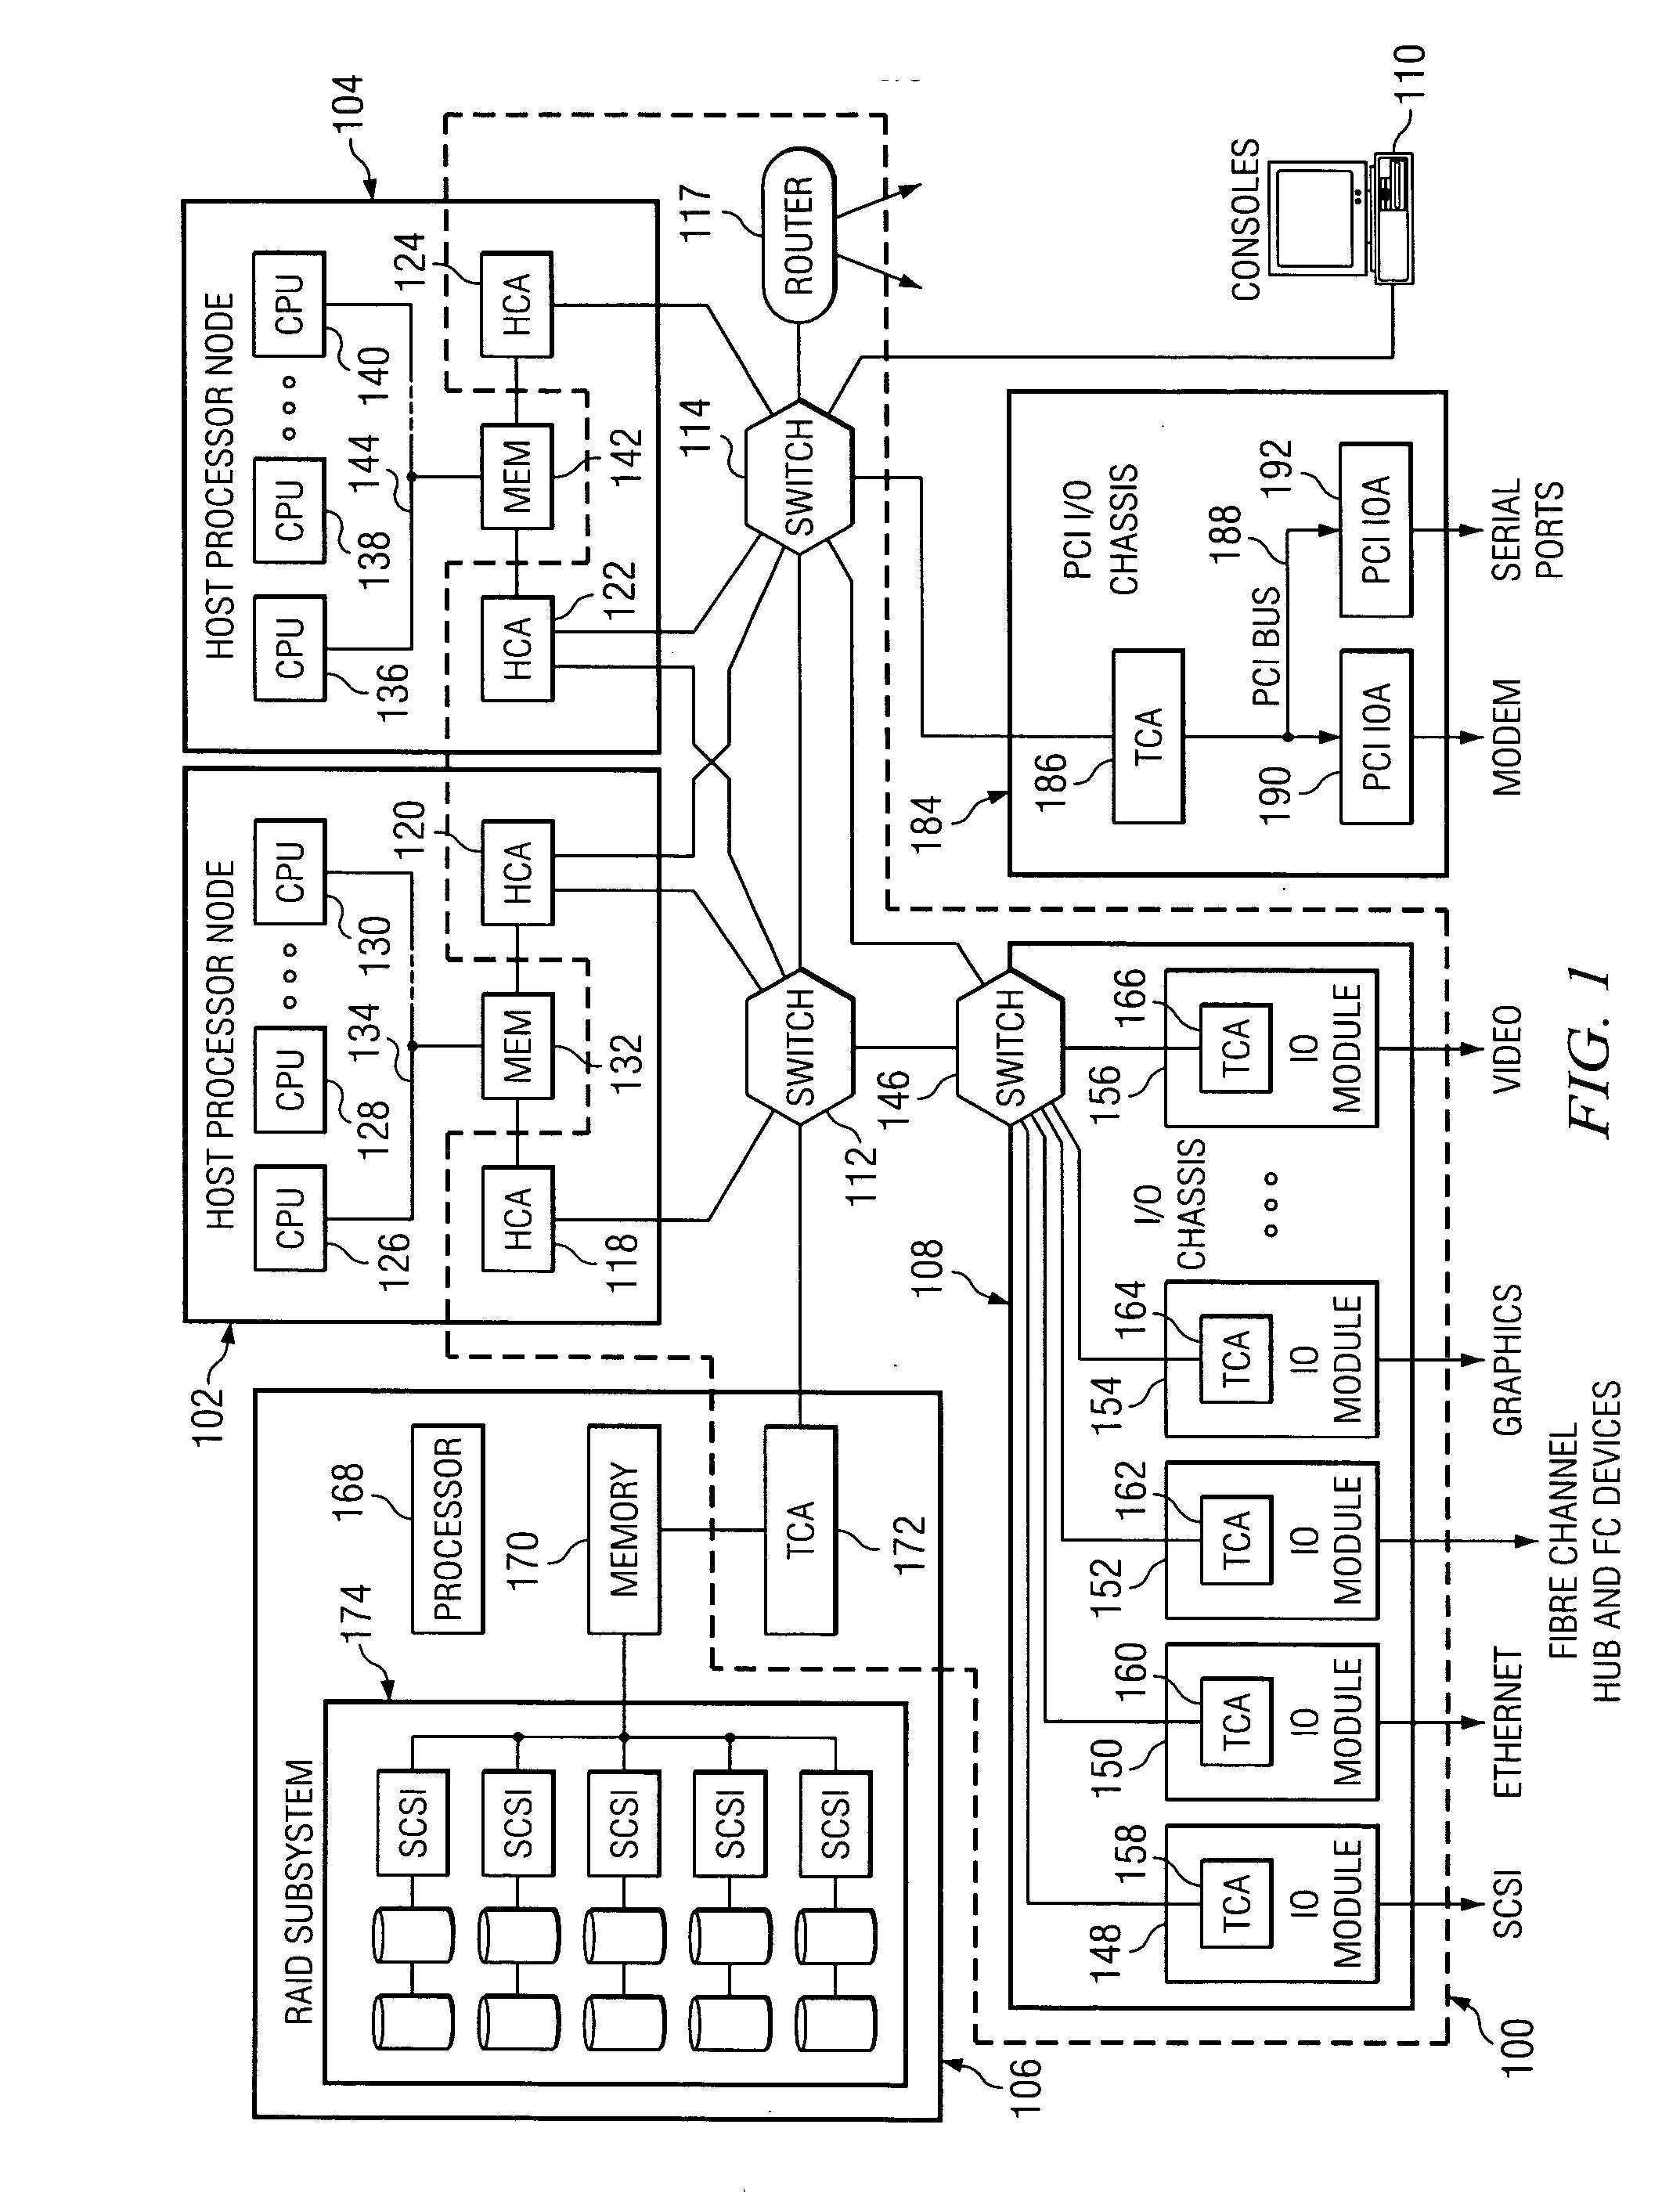 System and method for efficient implementation of a shared receive queue